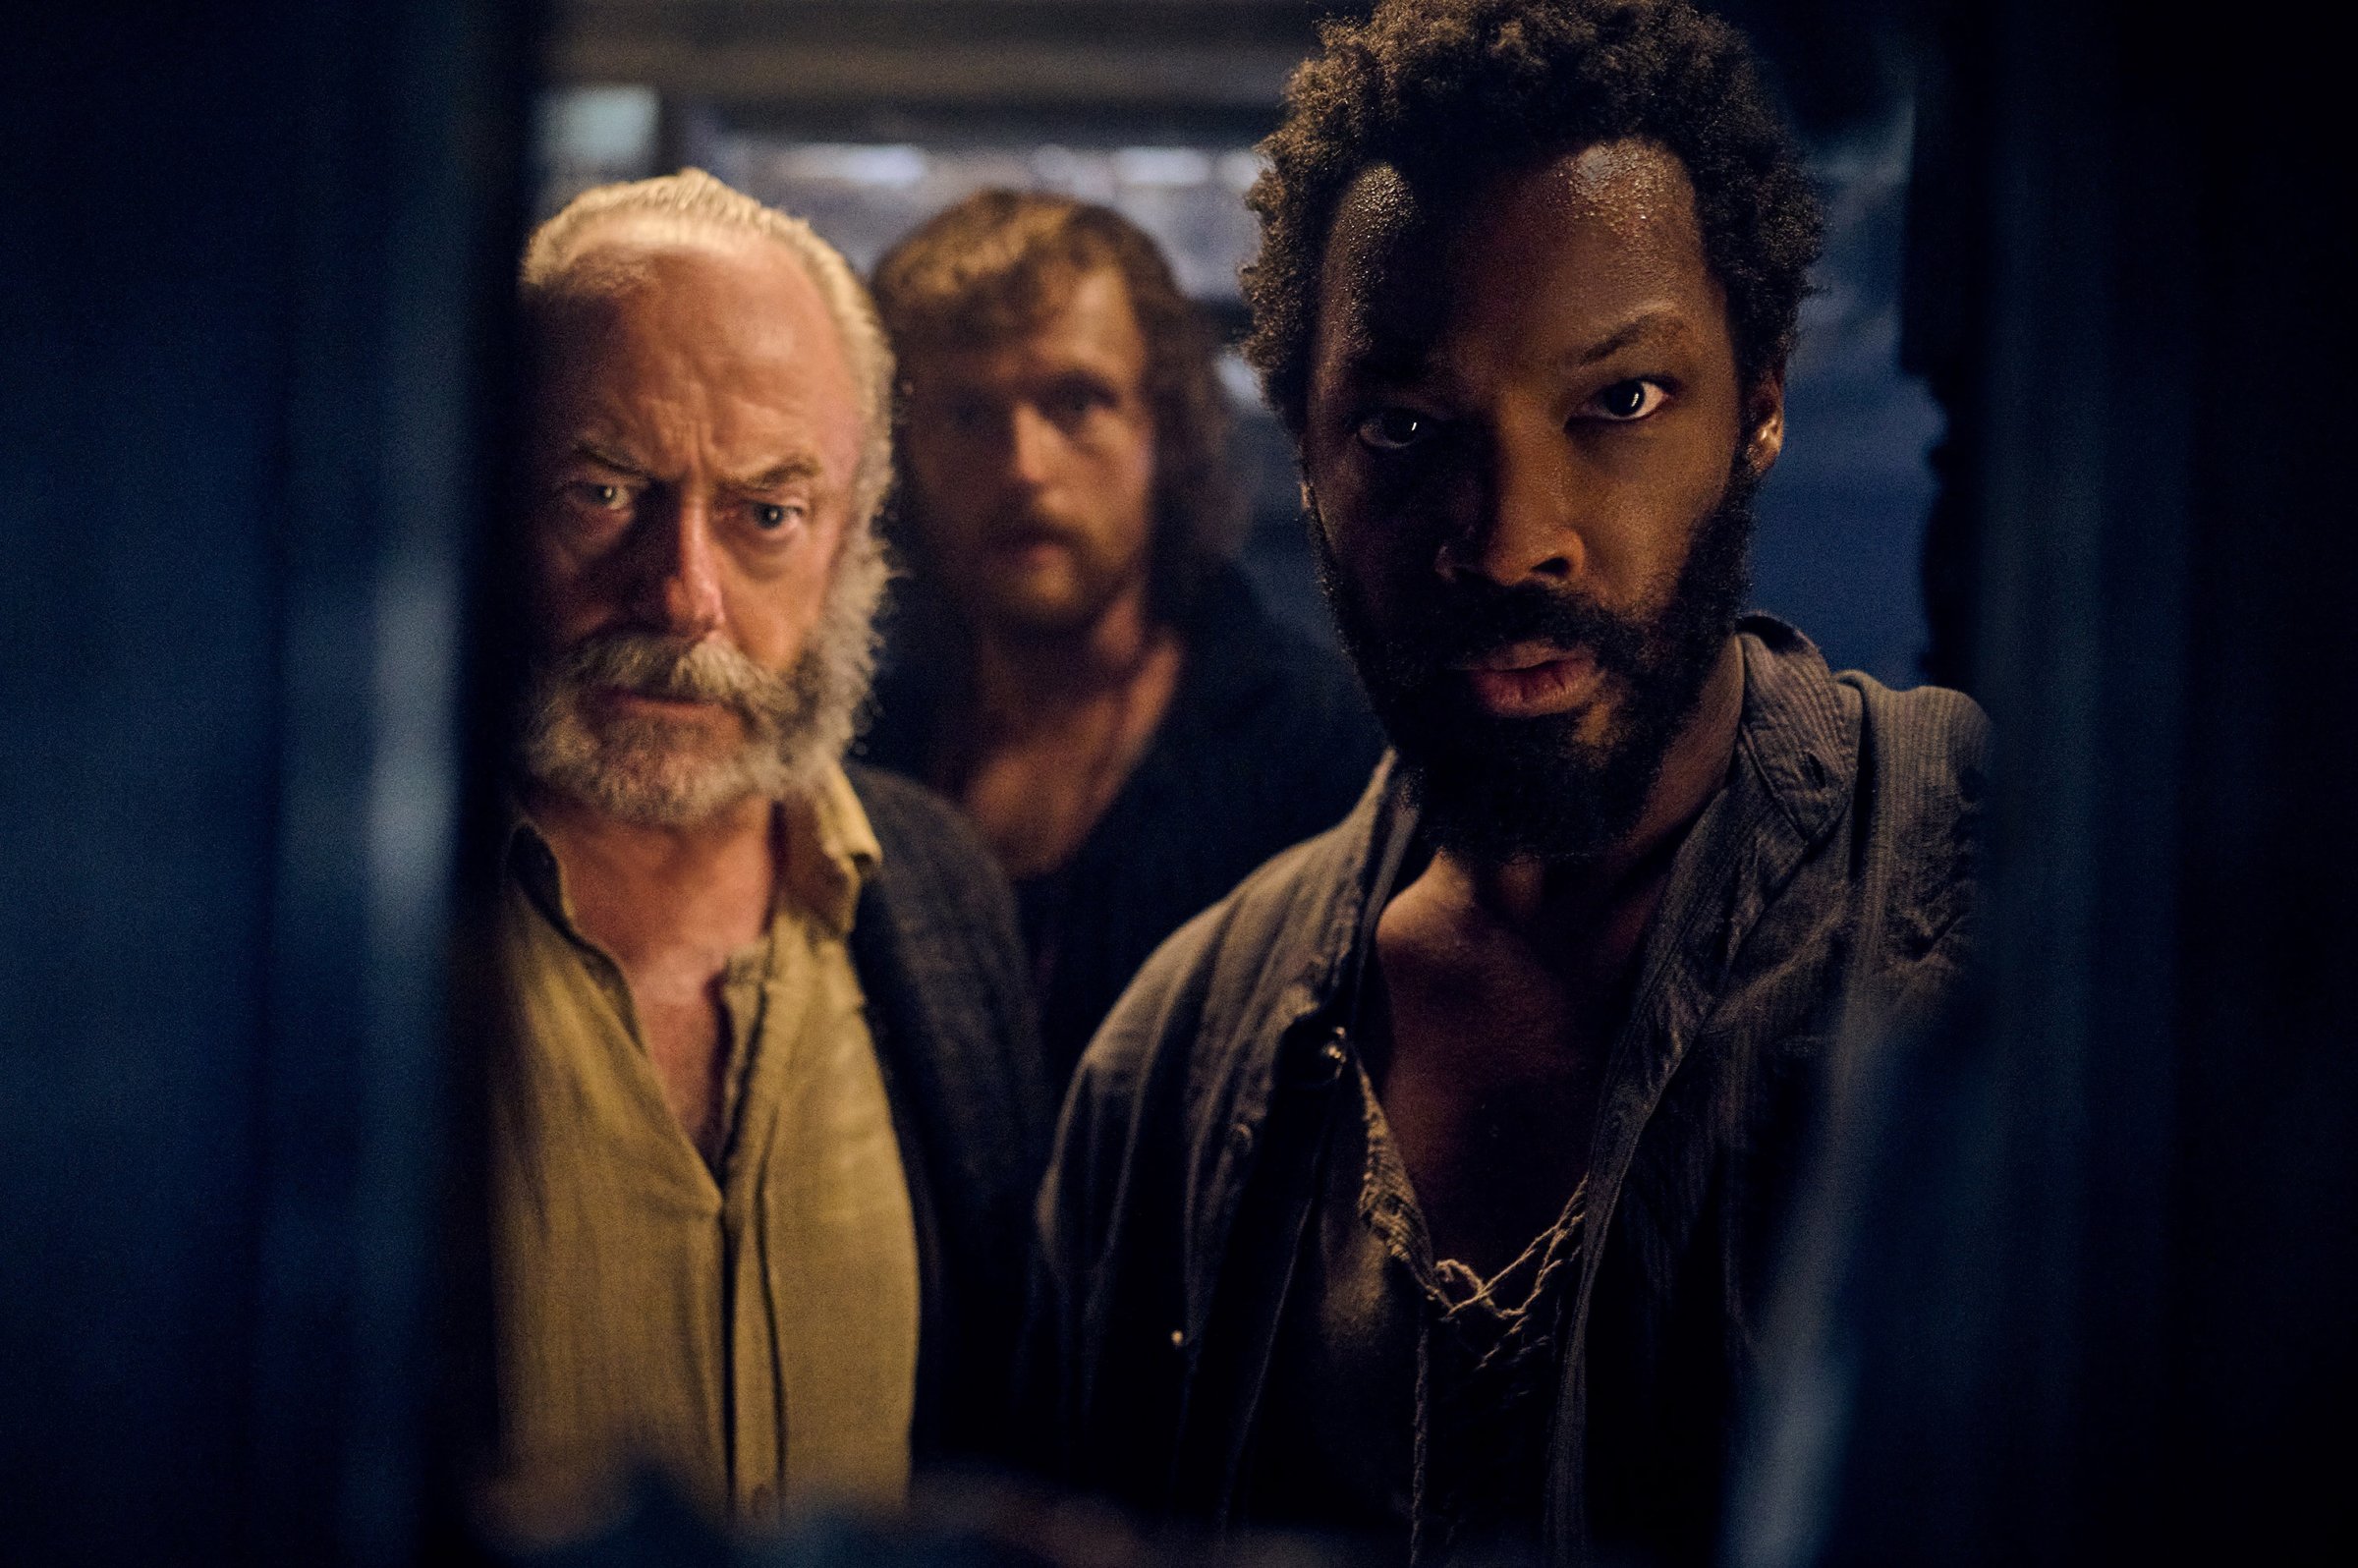 Liam Cunningham as Captain Eliot, Chris Walley as Abrams, and Corey Hawkins as Clemens in 'The Last Voyage of the Demeter'